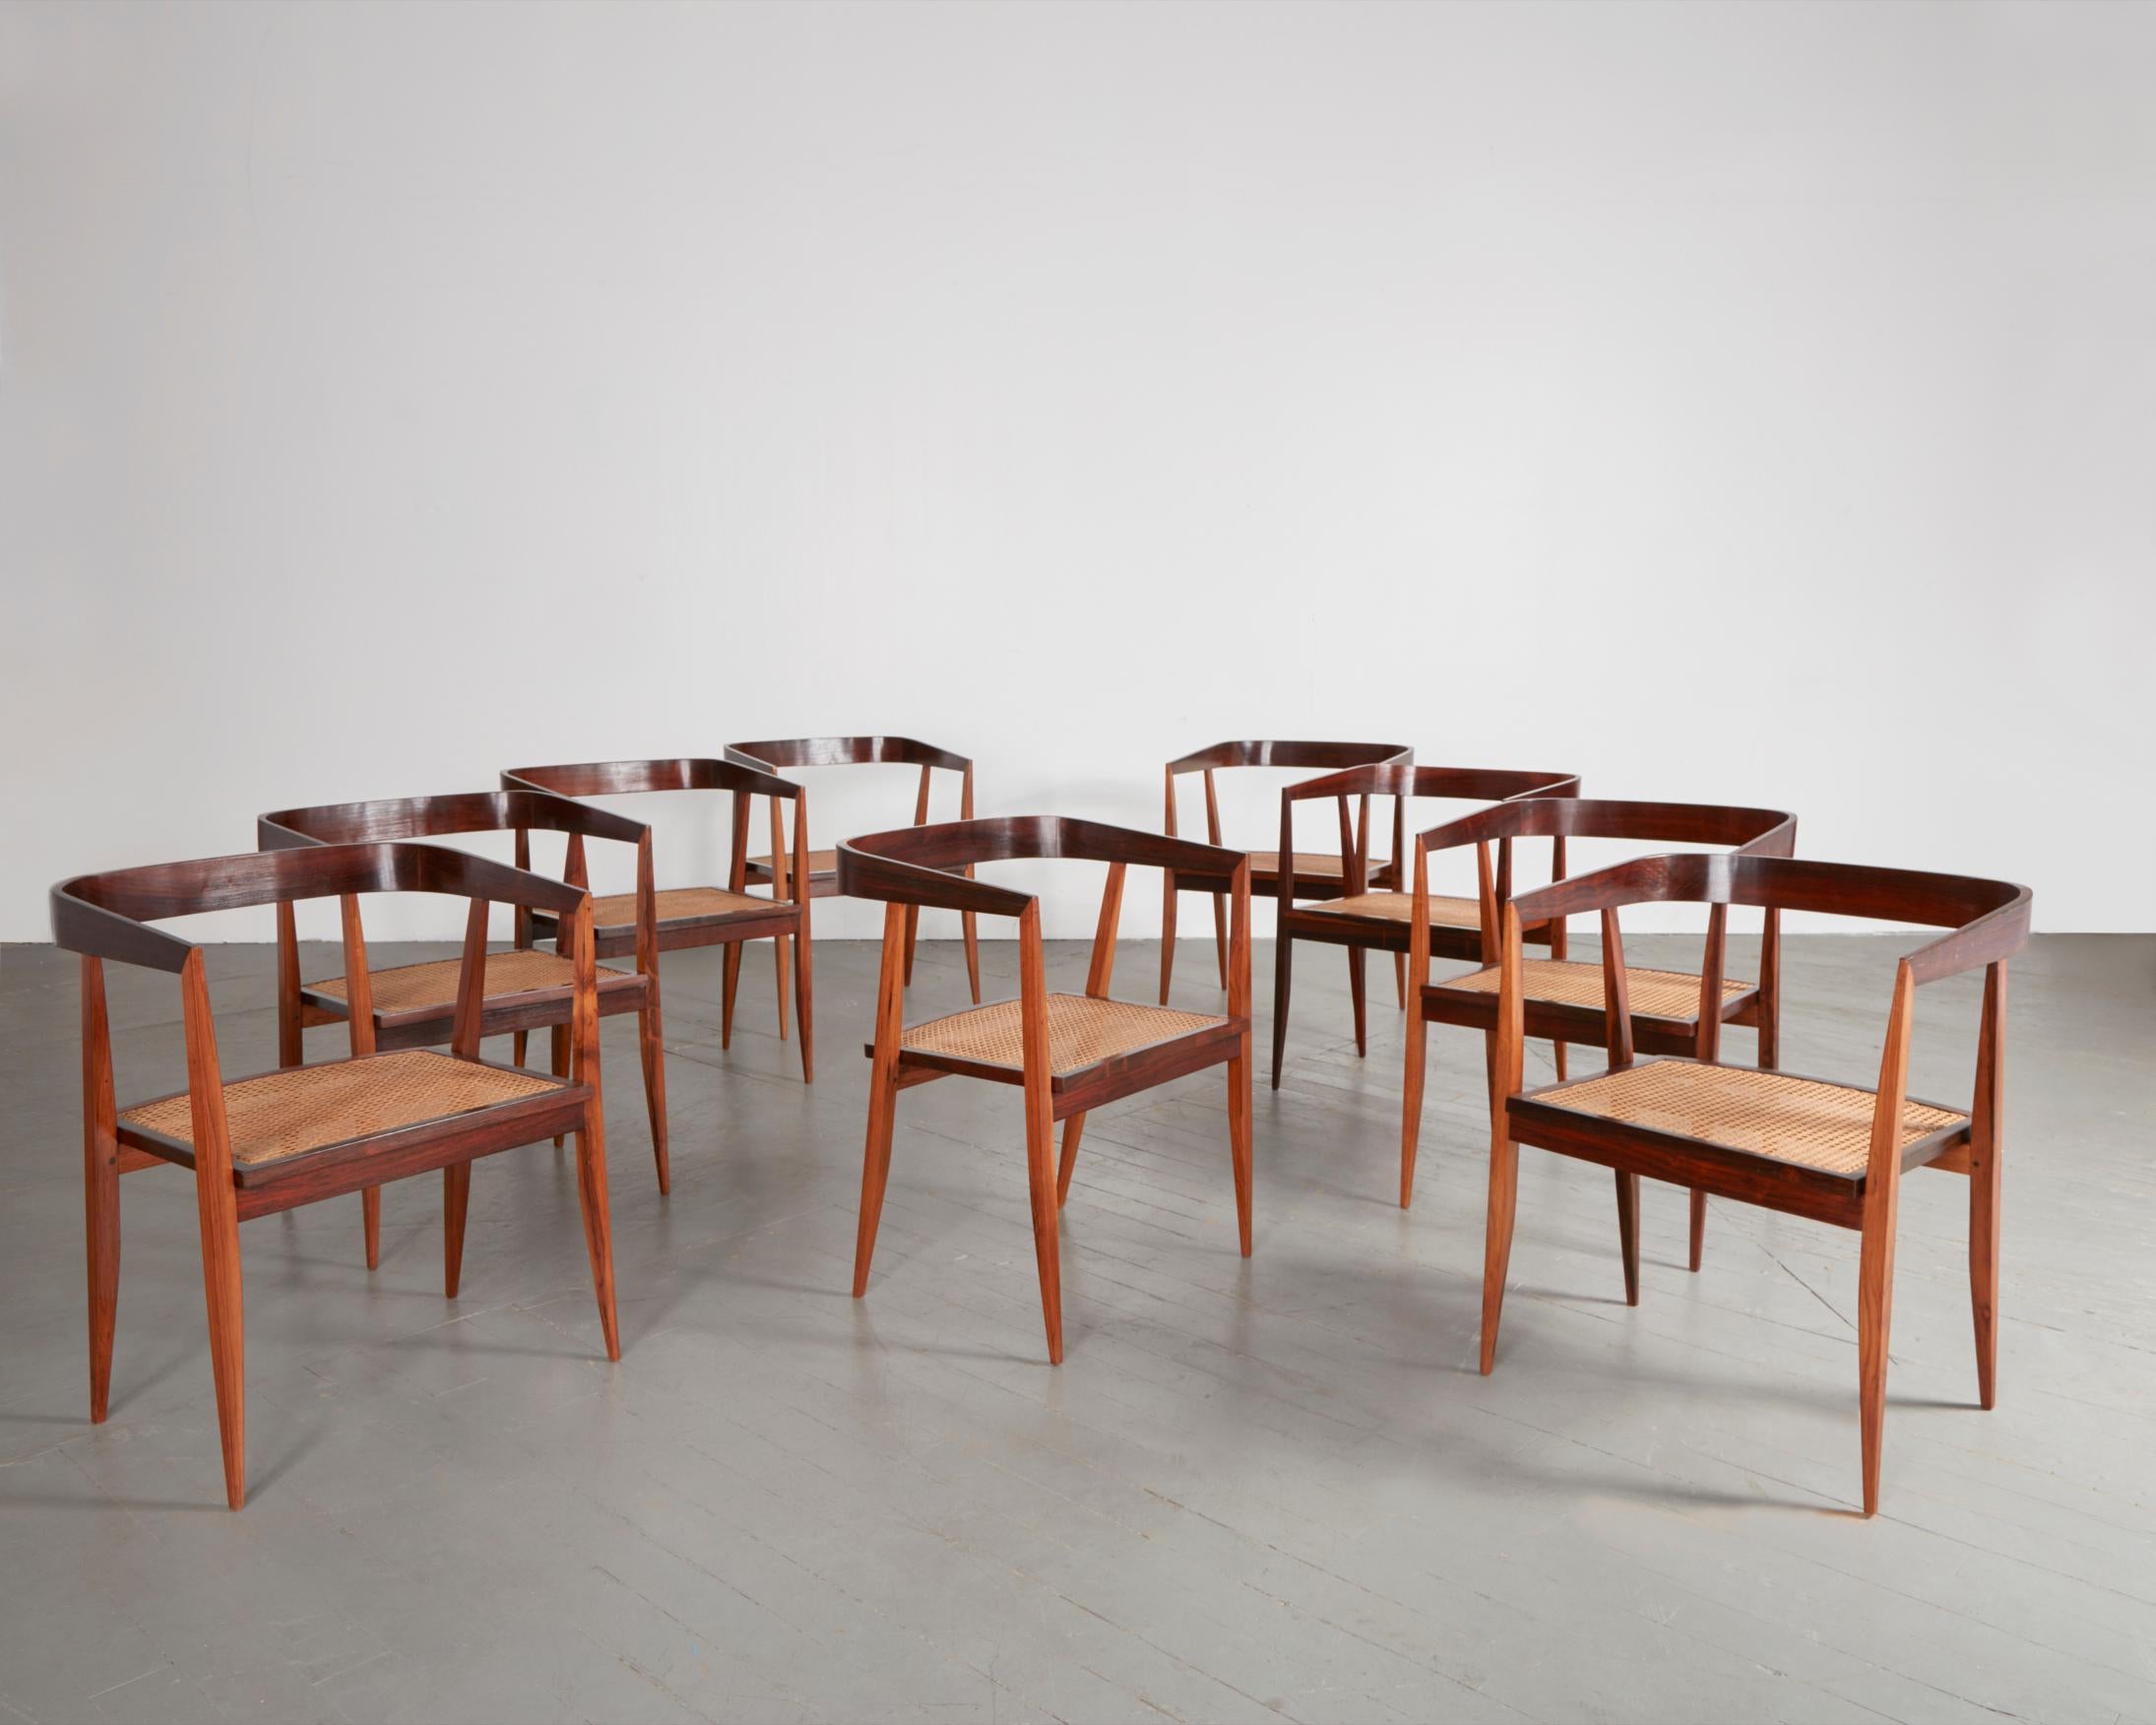 Set of 9 Dining Chairs, Joaquim Tenreiro, Brazil, 1960s For Sale at 1stDibs